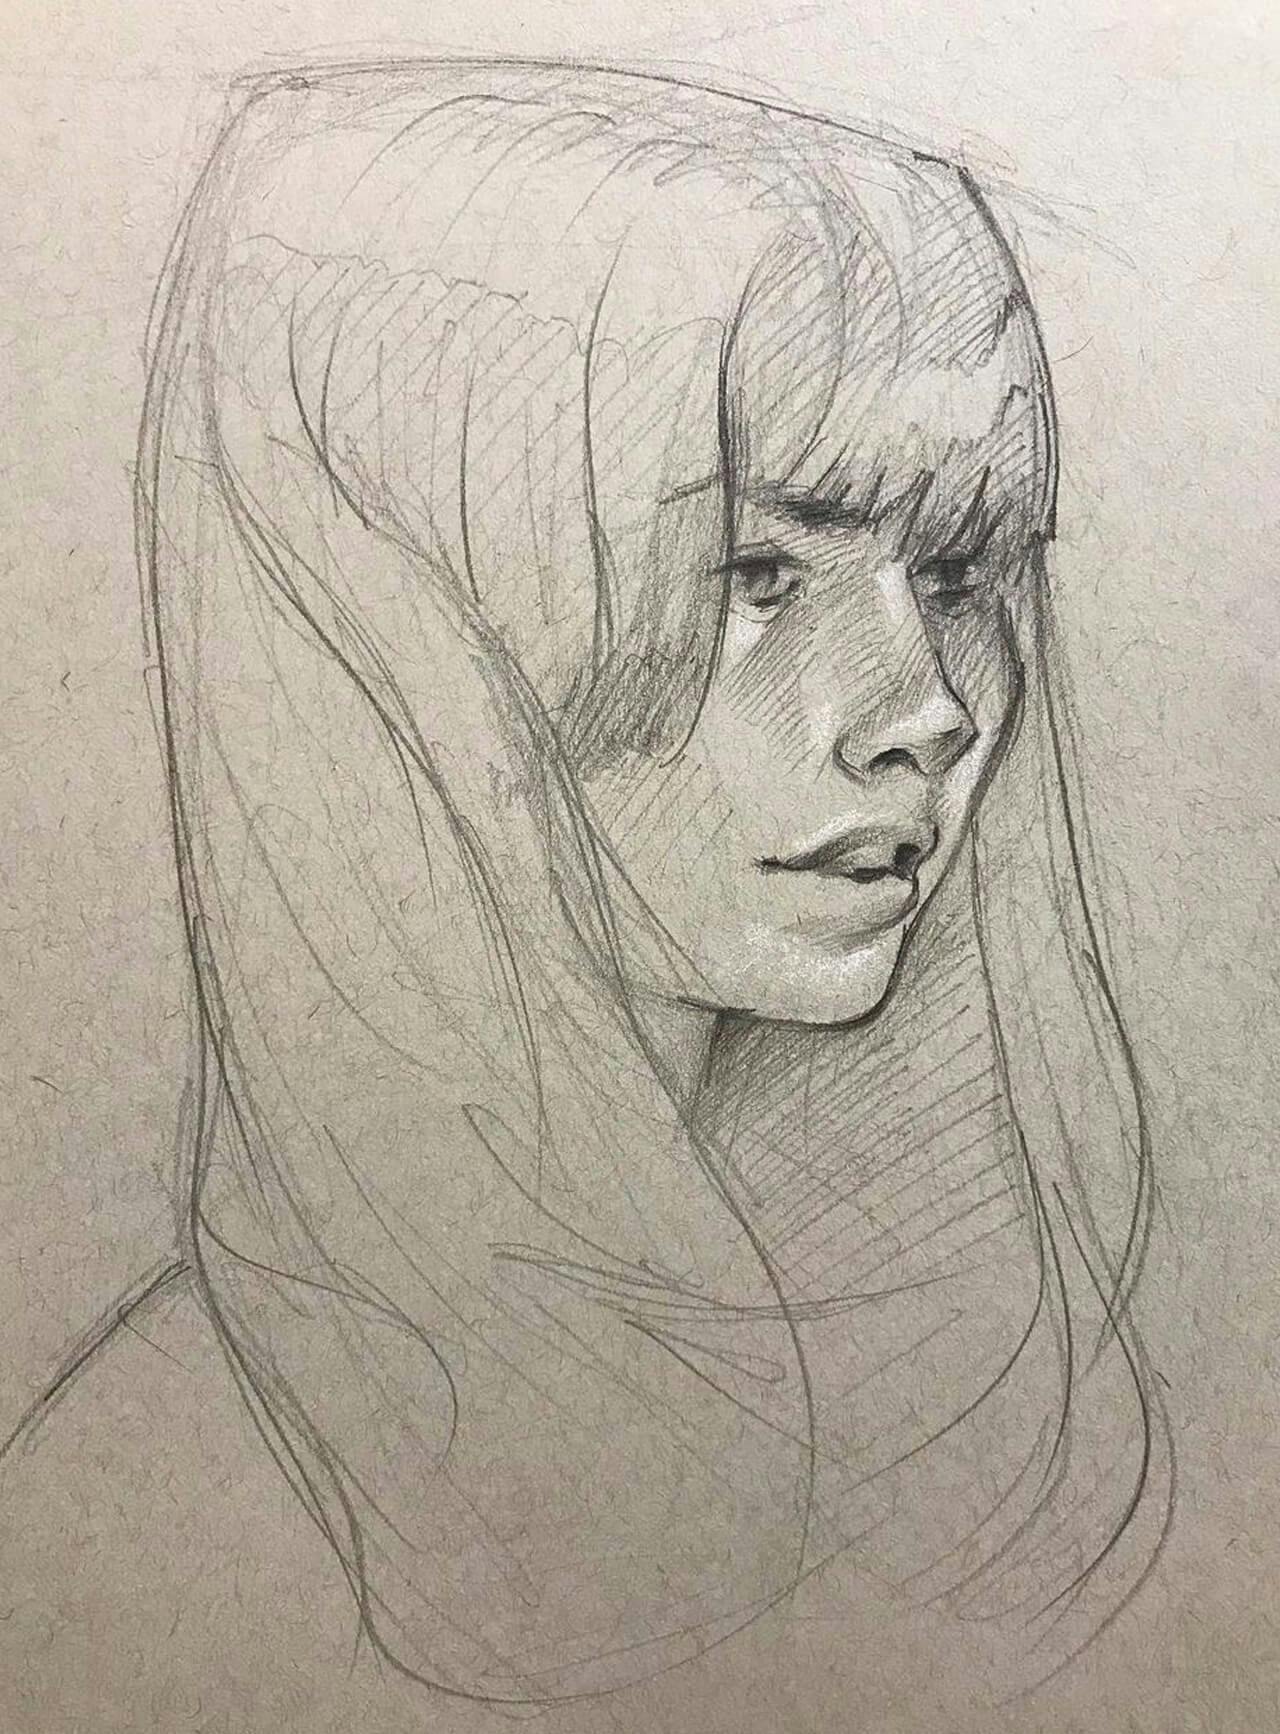 Graphite sketch, woman with long hair and bangs in three quarter view